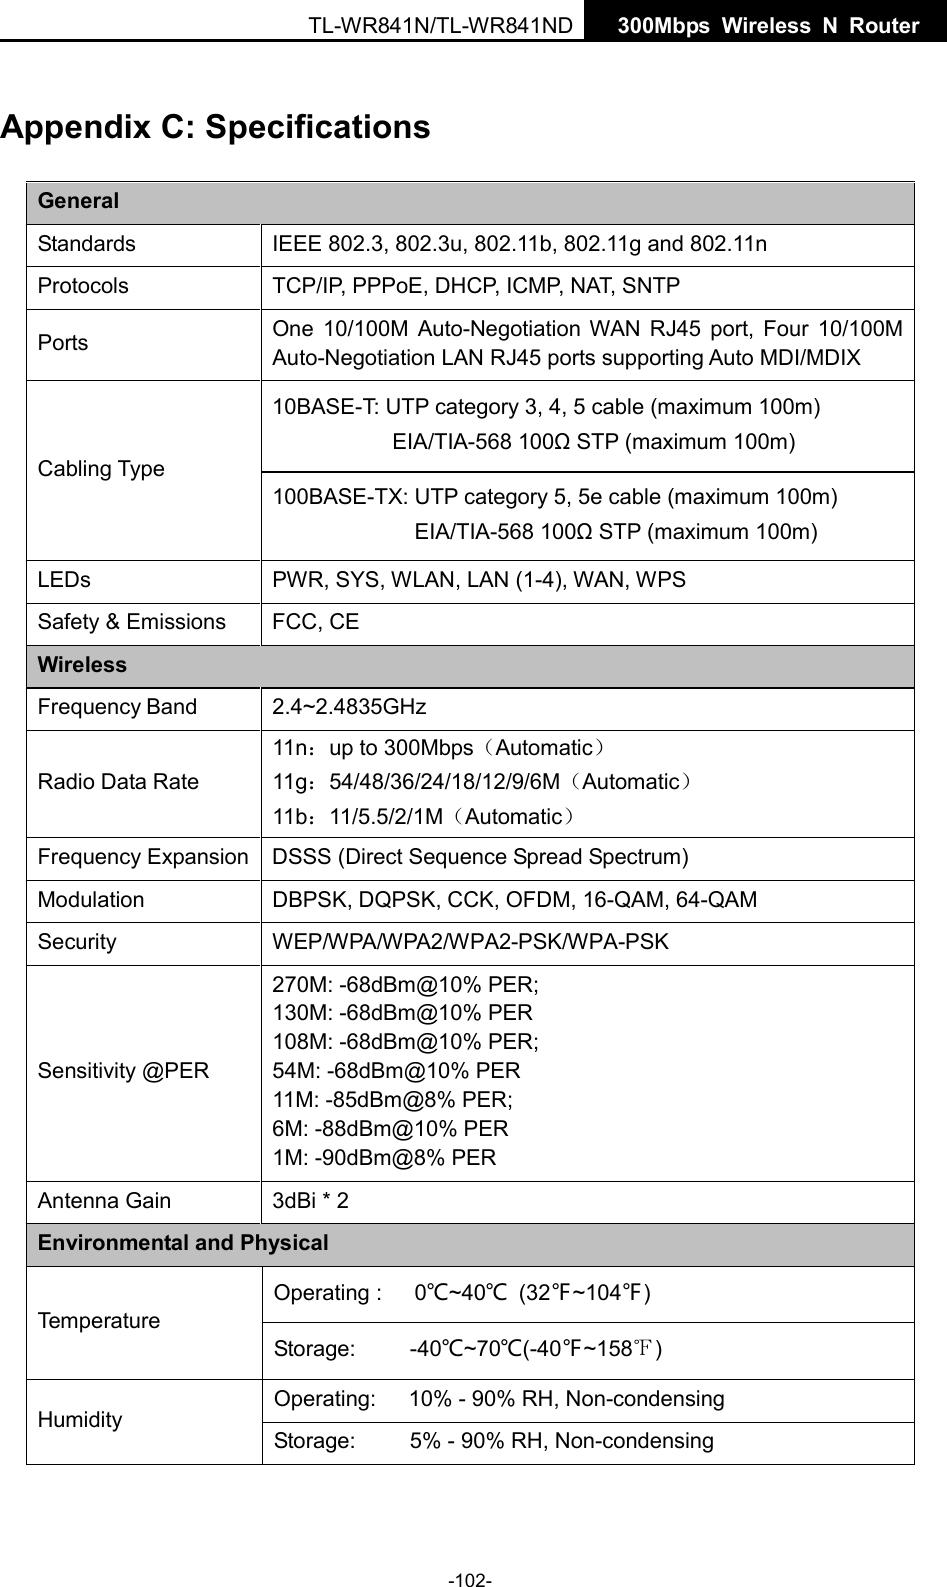  TL-WR841N/TL-WR841ND  300Mbps Wireless N  Router    Appendix C: Specifications General Standards IEEE 802.3, 802.3u, 802.11b, 802.11g and 802.11n Protocols TCP/IP, PPPoE, DHCP, ICMP, NAT, SNTP Ports One 10/100M Auto-Negotiation WAN RJ45 port, Four 10/100M Auto-Negotiation LAN RJ45 ports supporting Auto MDI/MDIX Cabling Type 10BASE-T: UTP category 3, 4, 5 cable (maximum 100m) EIA/TIA-568 100Ω STP (maximum 100m) 100BASE-TX: UTP category 5, 5e cable (maximum 100m) EIA/TIA-568 100Ω STP (maximum 100m) LEDs  PWR, SYS, WLAN, LAN (1-4), WAN, WPS Safety &amp; Emissions FCC, CE Wireless Frequency Band 2.4~2.4835GHz Radio Data Rate 11n：up to 300Mbps（Automatic） 11g：54/48/36/24/18/12/9/6M（Automatic） 11b：11/5.5/2/1M（Automatic） Frequency Expansion DSSS (Direct Sequence Spread Spectrum) Modulation DBPSK, DQPSK, CCK, OFDM, 16-QAM, 64-QAM Security WEP/WPA/WPA2/WPA2-PSK/WPA-PSK Sensitivity @PER 270M: -68dBm@10% PER; 130M: -68dBm@10% PER 108M: -68dBm@10% PER;   54M: -68dBm@10% PER 11M: -85dBm@8% PER;   6M: -88dBm@10% PER 1M: -90dBm@8% PER Antenna Gain  3dBi * 2 Environmental and Physical Te m perature Operating :   0℃~40℃  (32℉~104℉) Storage:     -40℃~70℃(-40℉~158℉) Humidity Operating:   10% - 90% RH, Non-condensing Storage:     5% - 90% RH, Non-condensing -102- 